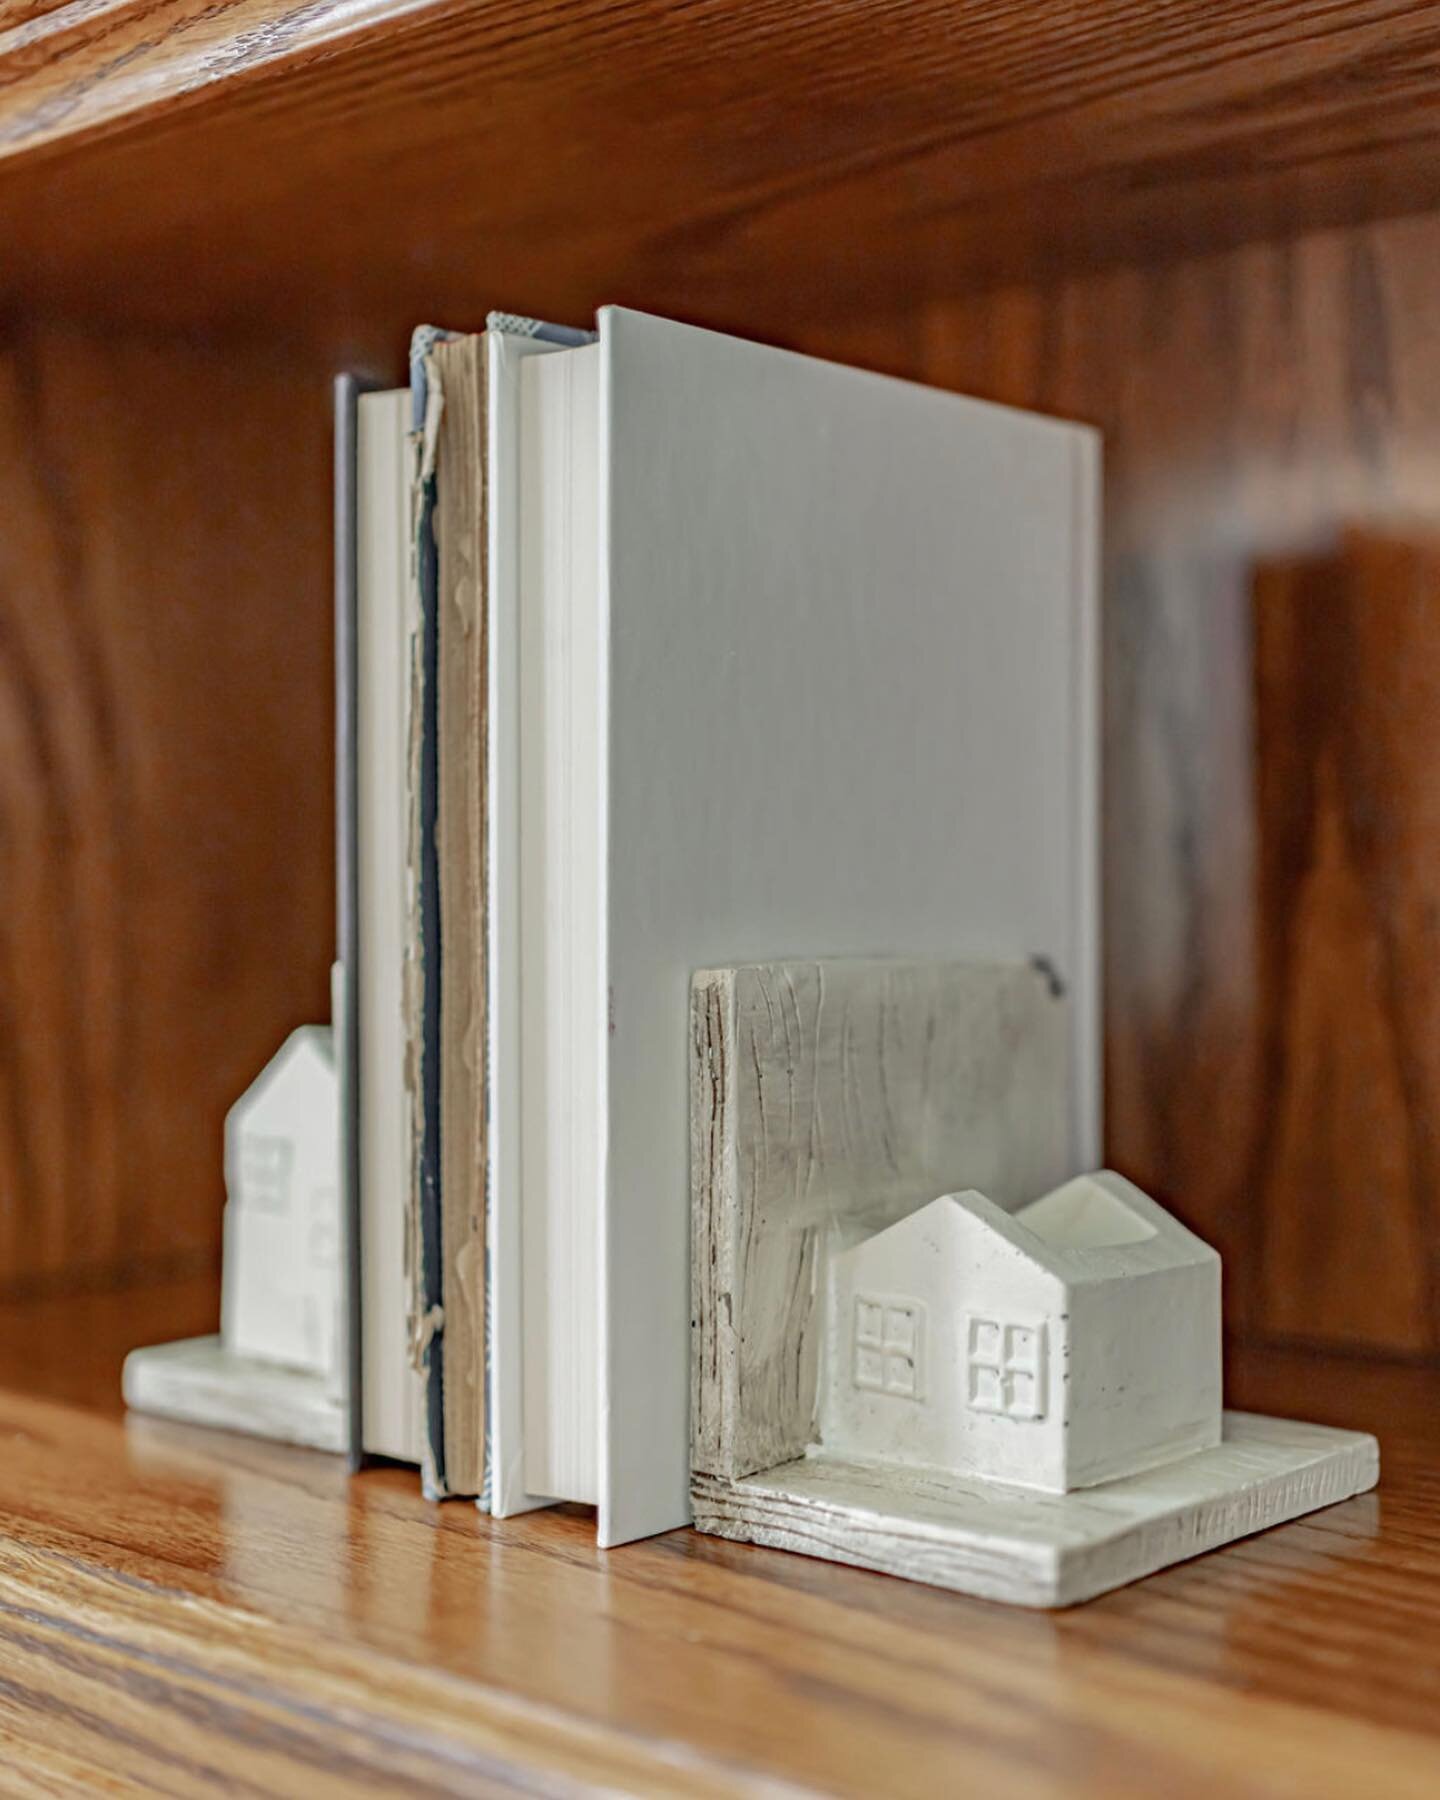 We swoon over precious little pieces like these book ends 😍 They we&rsquo;re the perfect addition to the shelf styling! 

#staging #idaho #realestate #realestatephotography #realtor #idahome #kitchen #living #goals #dreamhome #beforeandafter #interi